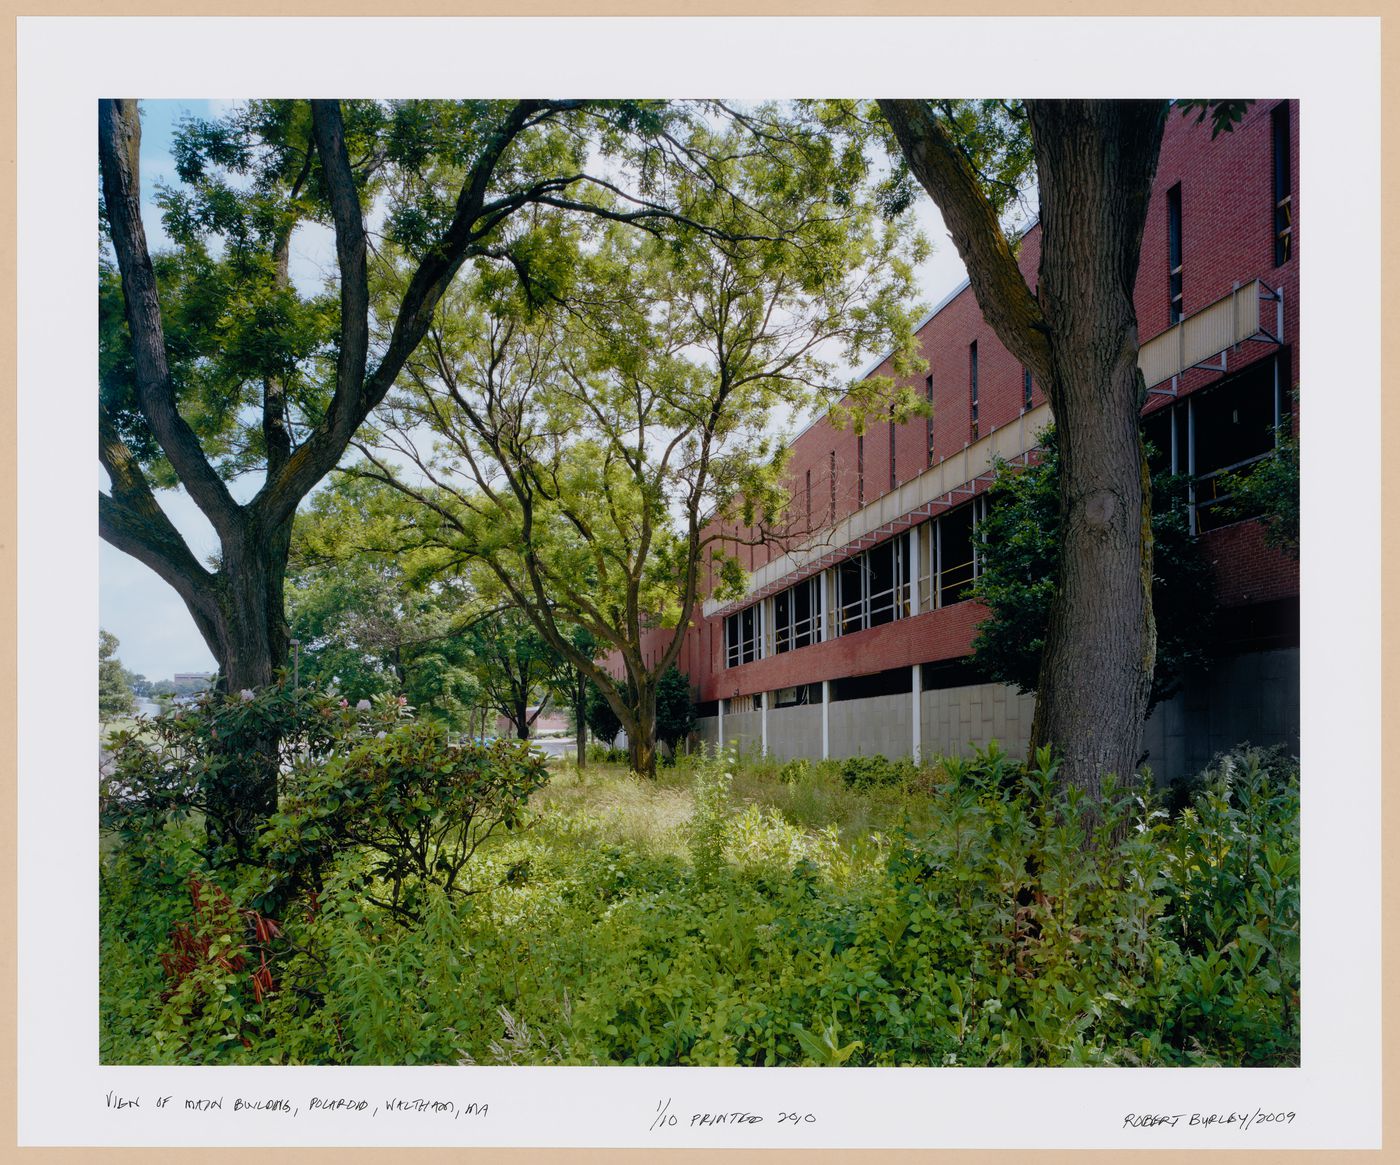 The Disappearance of Darkness Series: View of Main Building, Polaroid Headquarters, Waltham, MA, United States